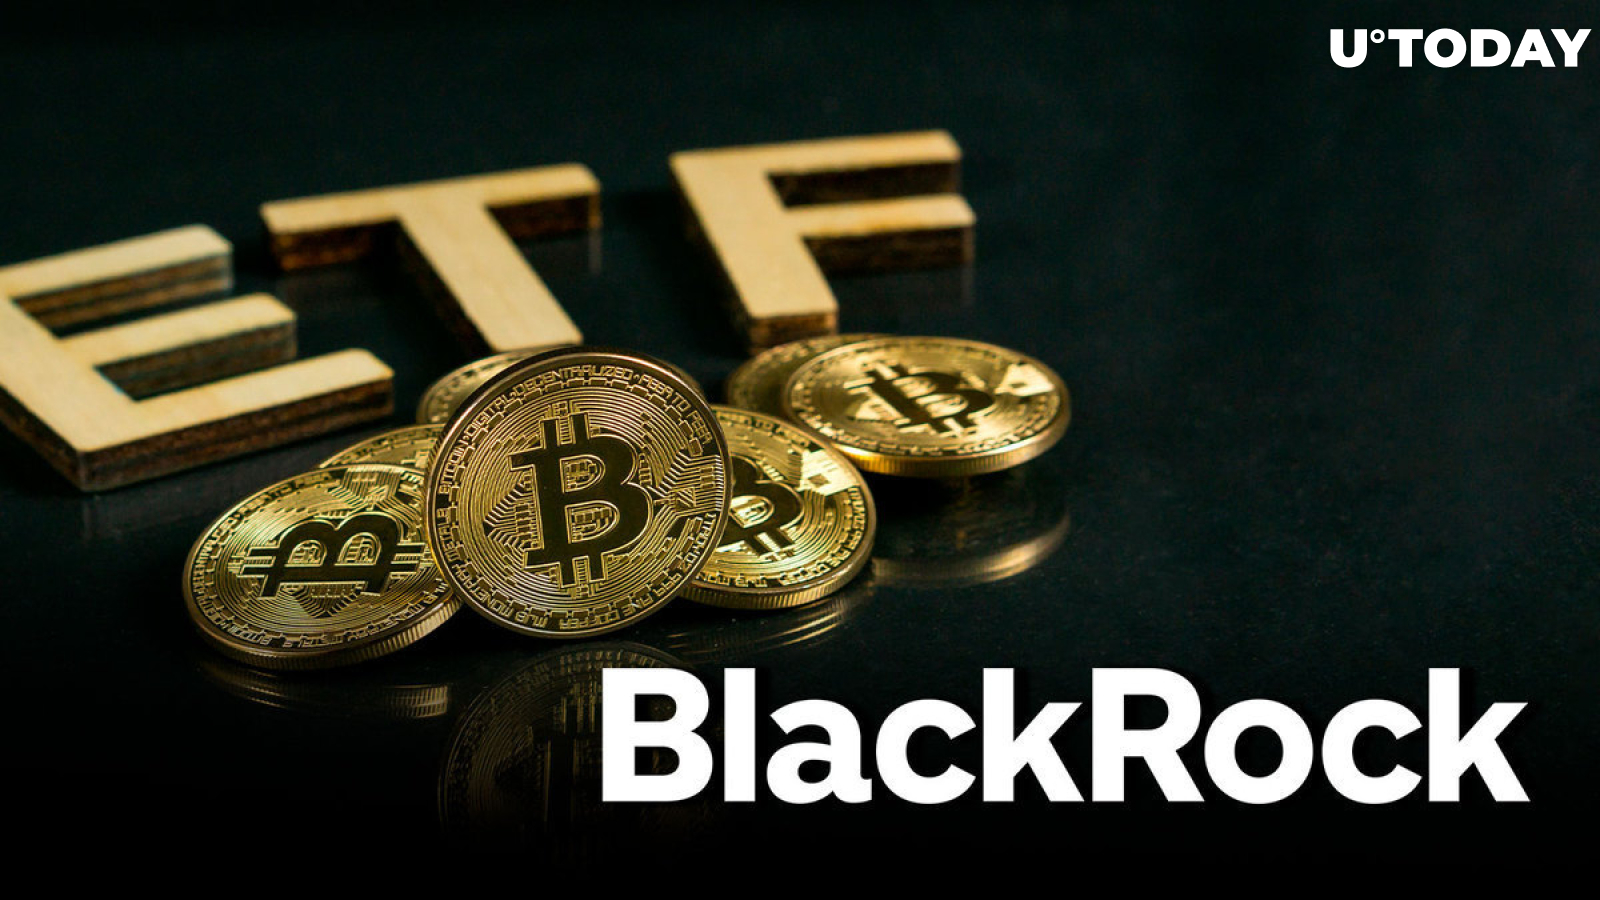 BlackRock's Bitcoin ETF IBIT Records First Millions in Volume, But There May Be a Catch